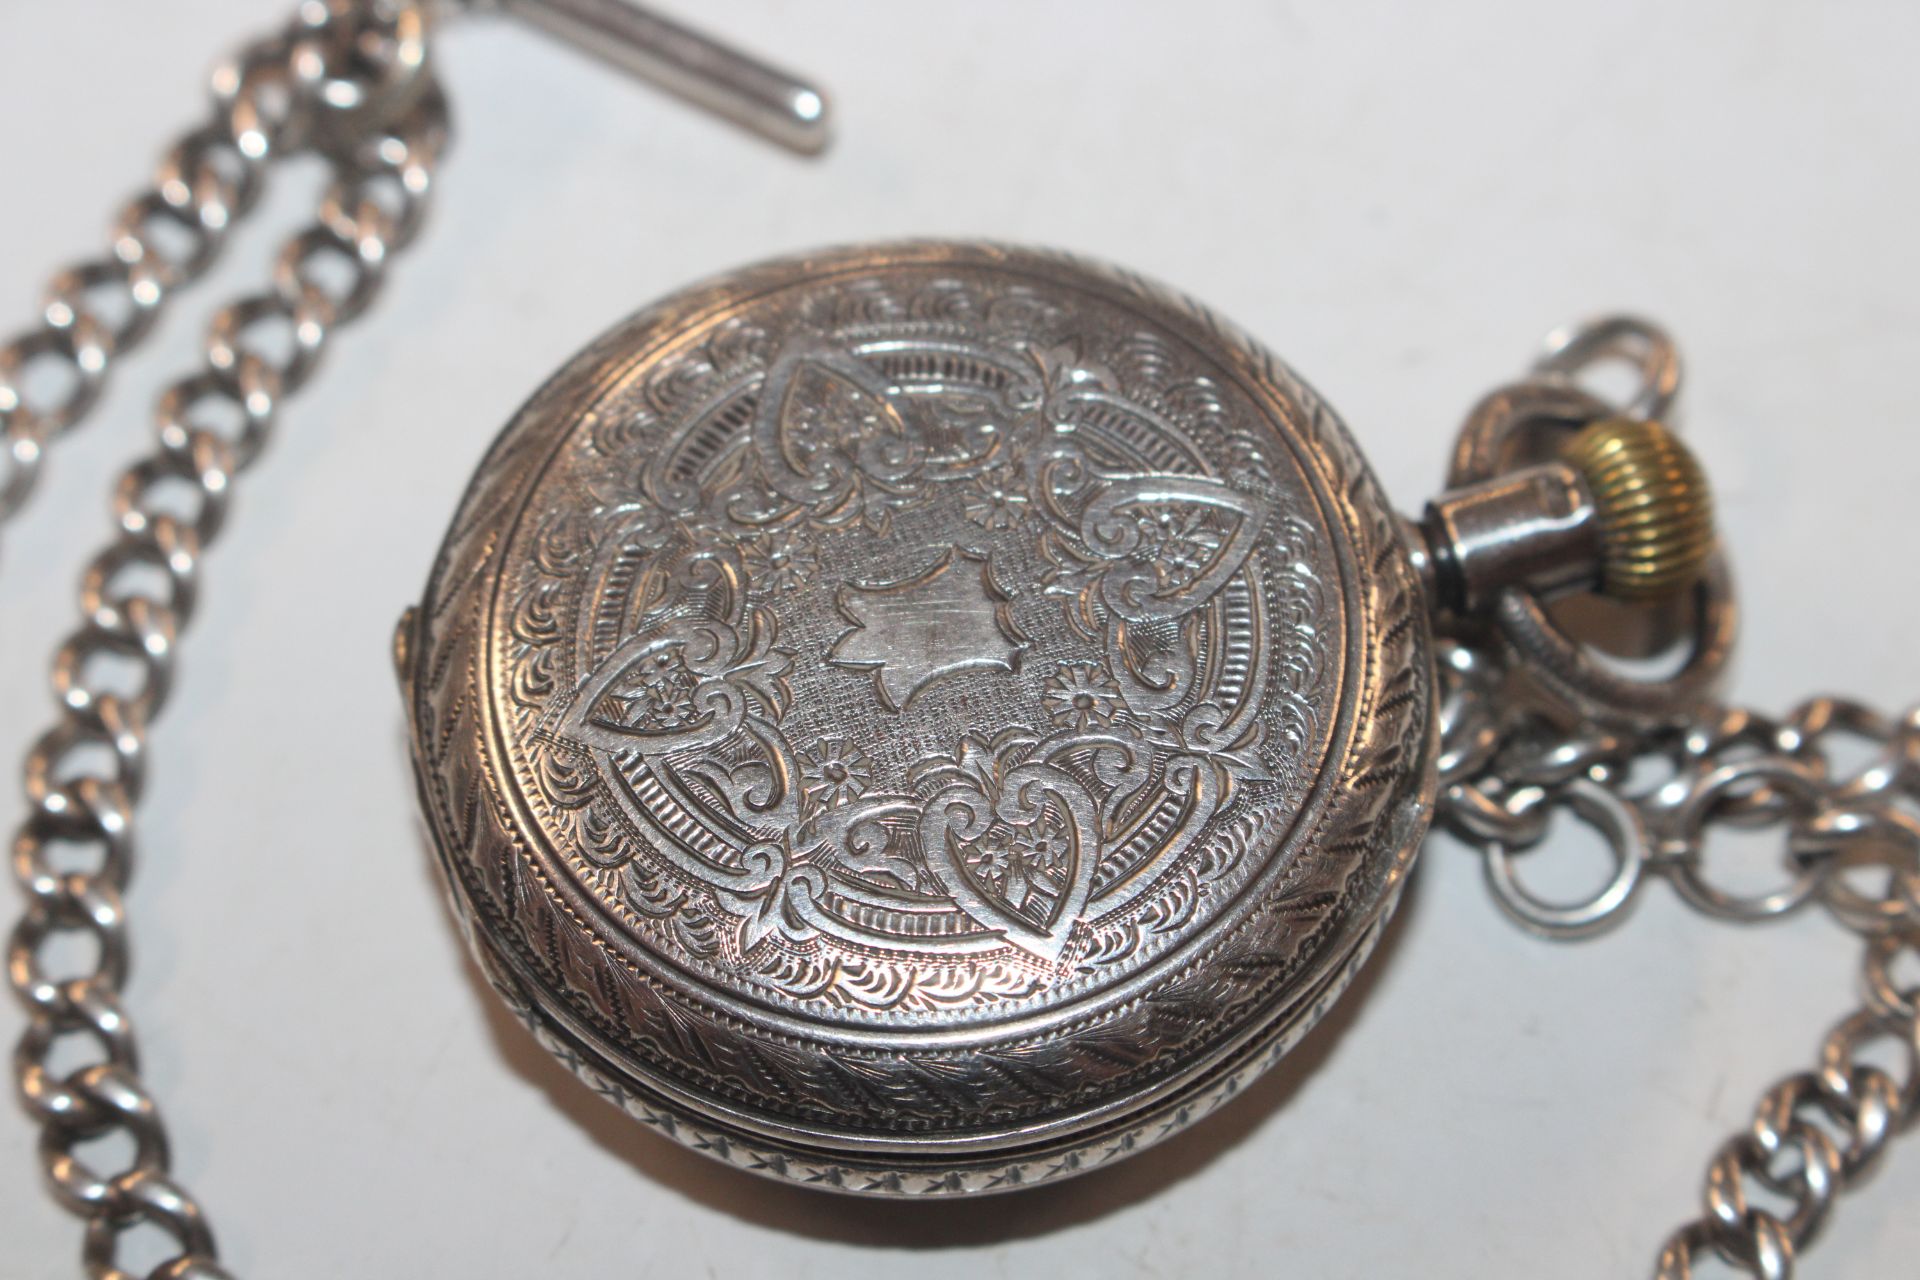 A Waterbury watch Co. silver cased pocket watch an - Image 4 of 6